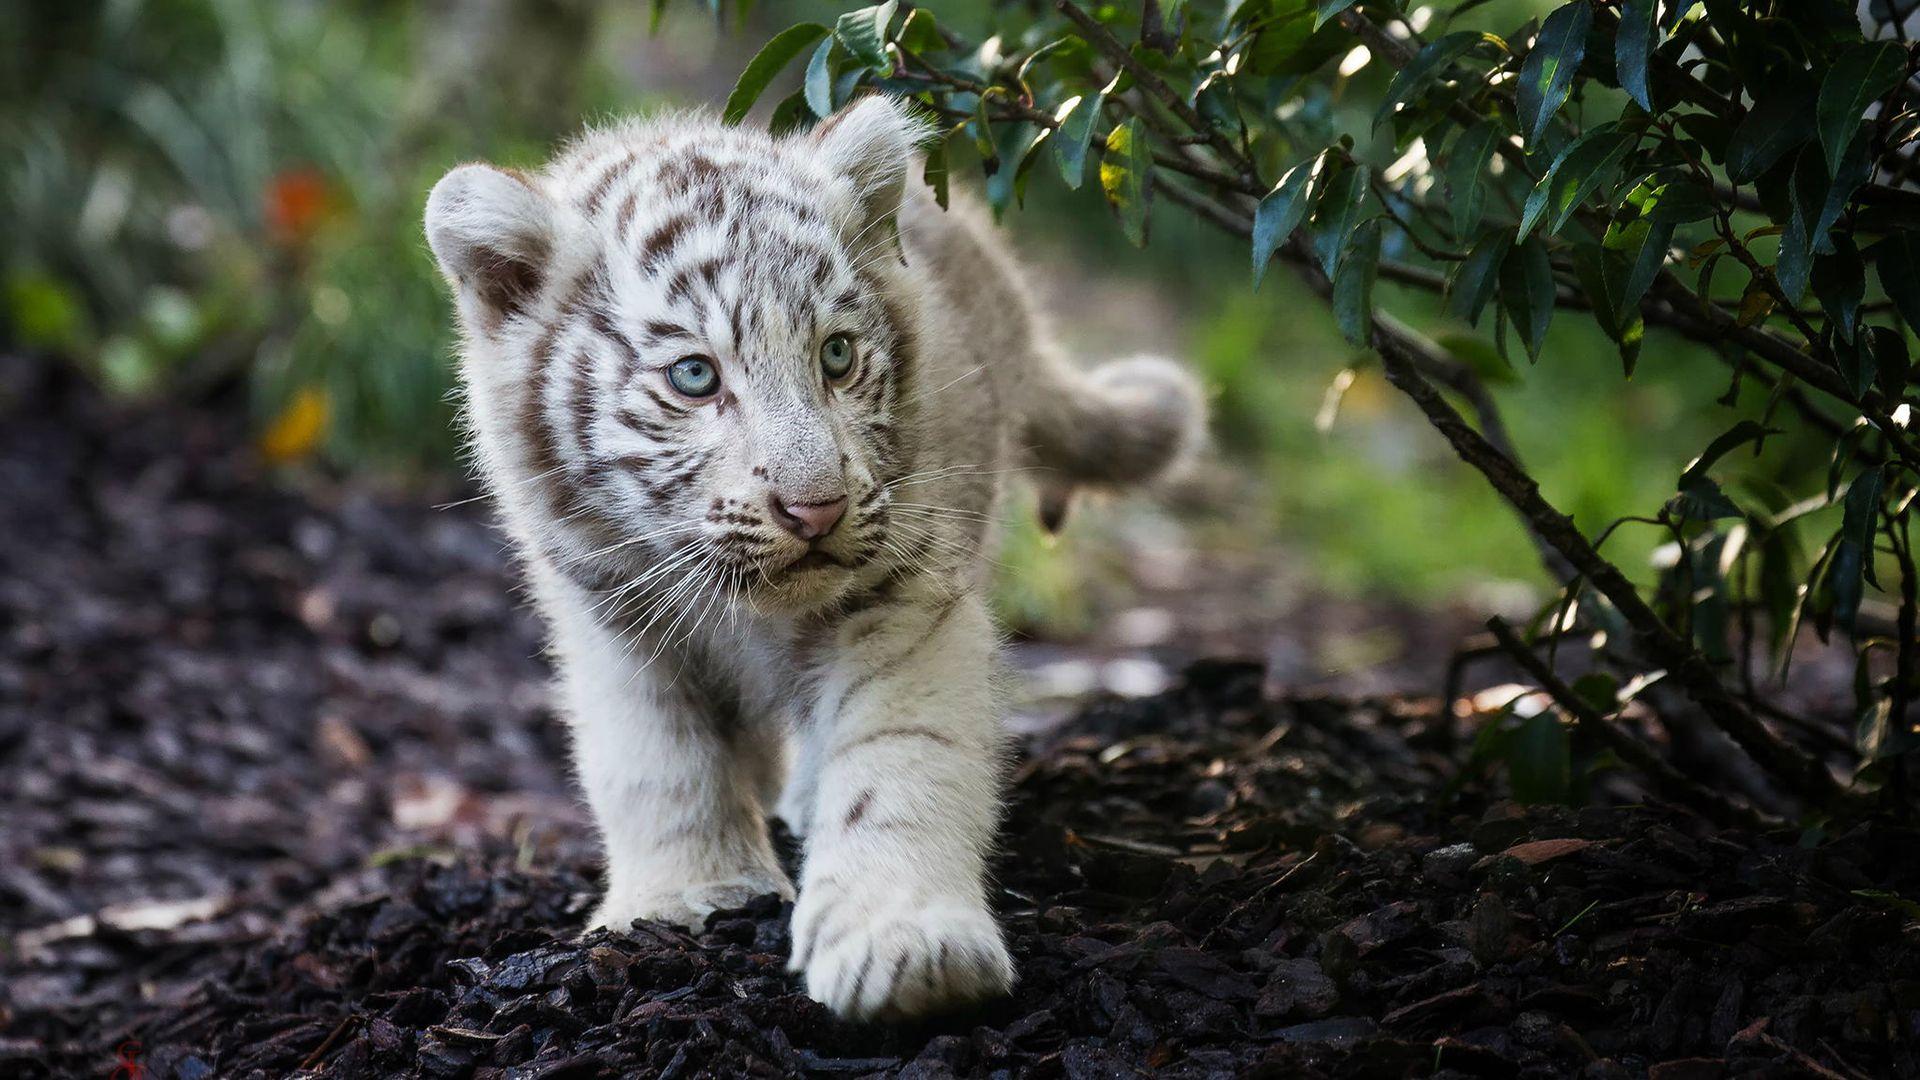 White Tiger Full HD Wallpaper and Background Imagex1080